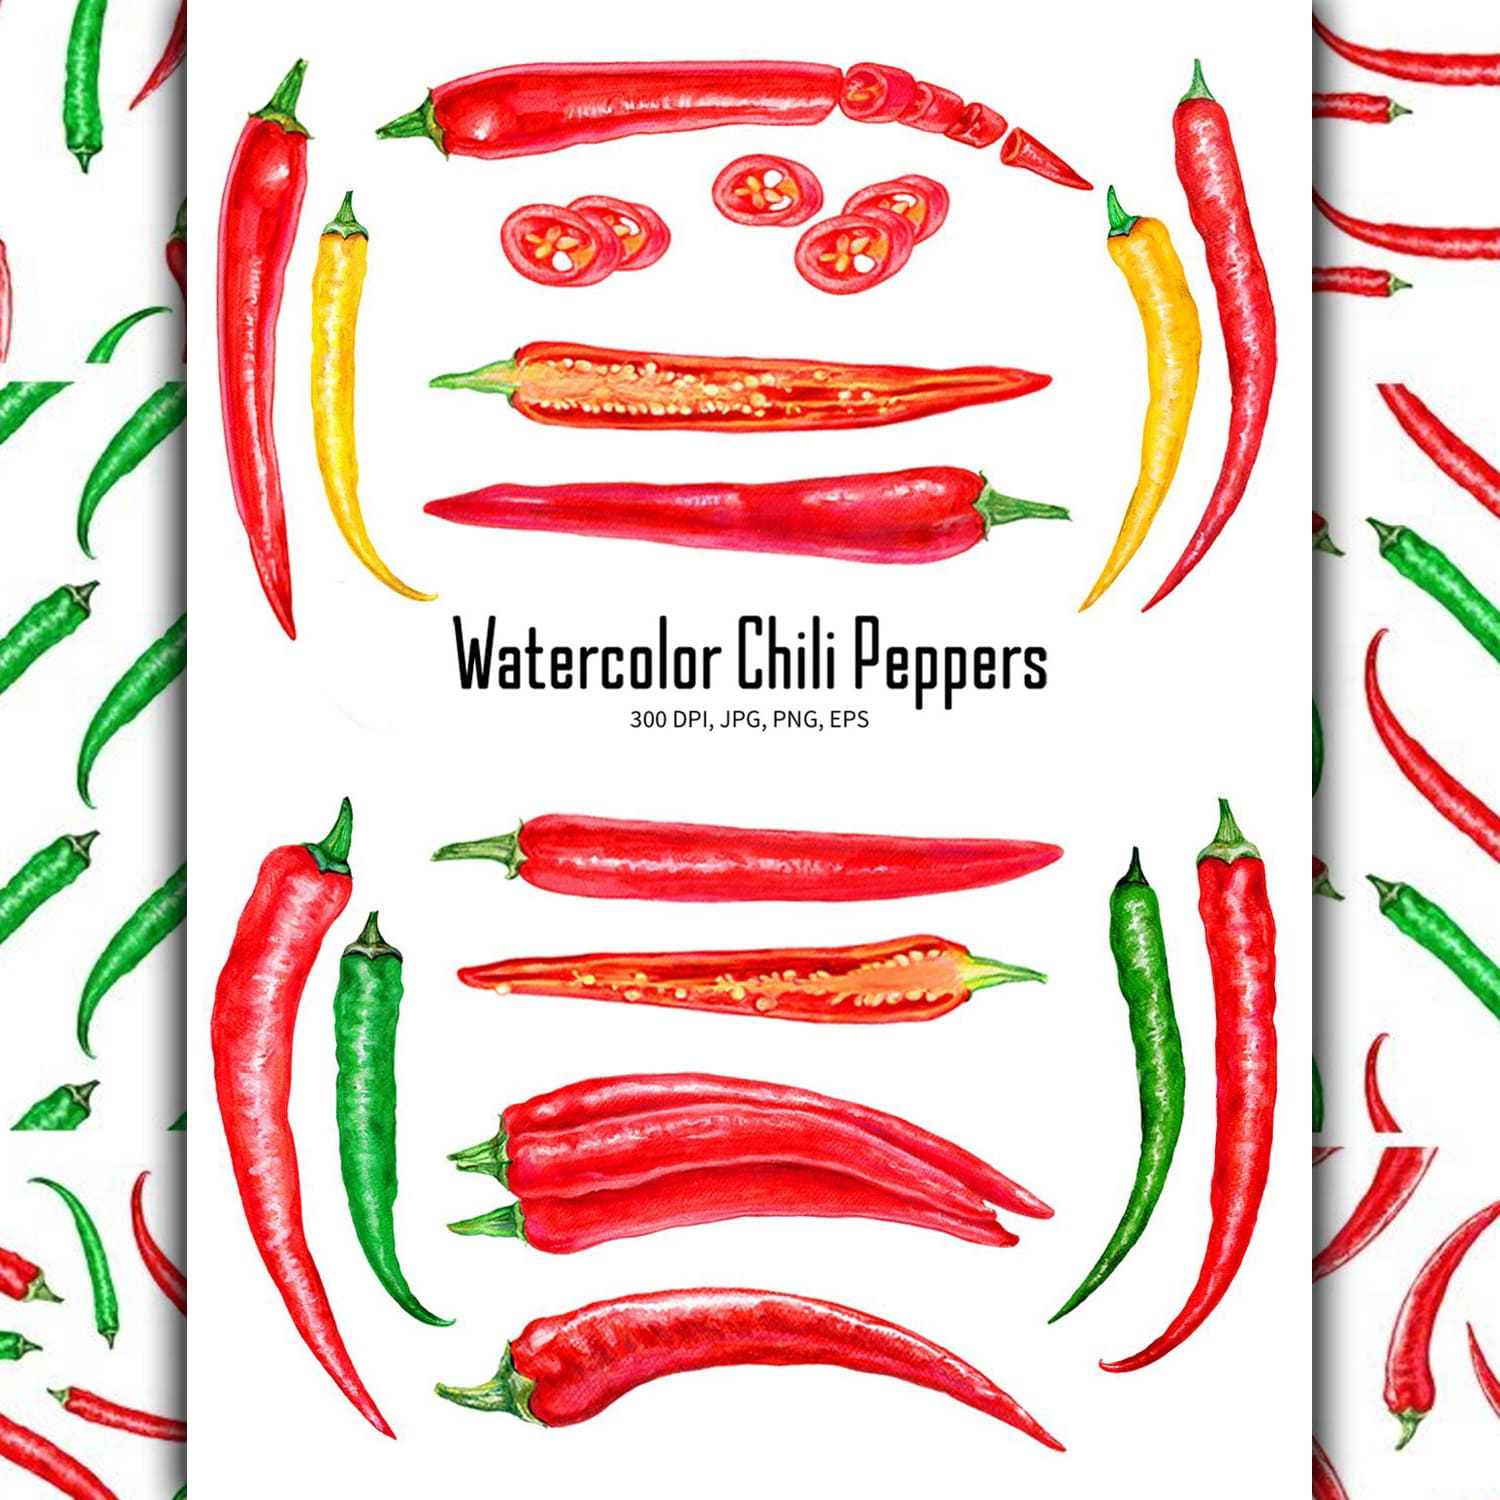 Watercolor Chilli Peppers Collection cover.